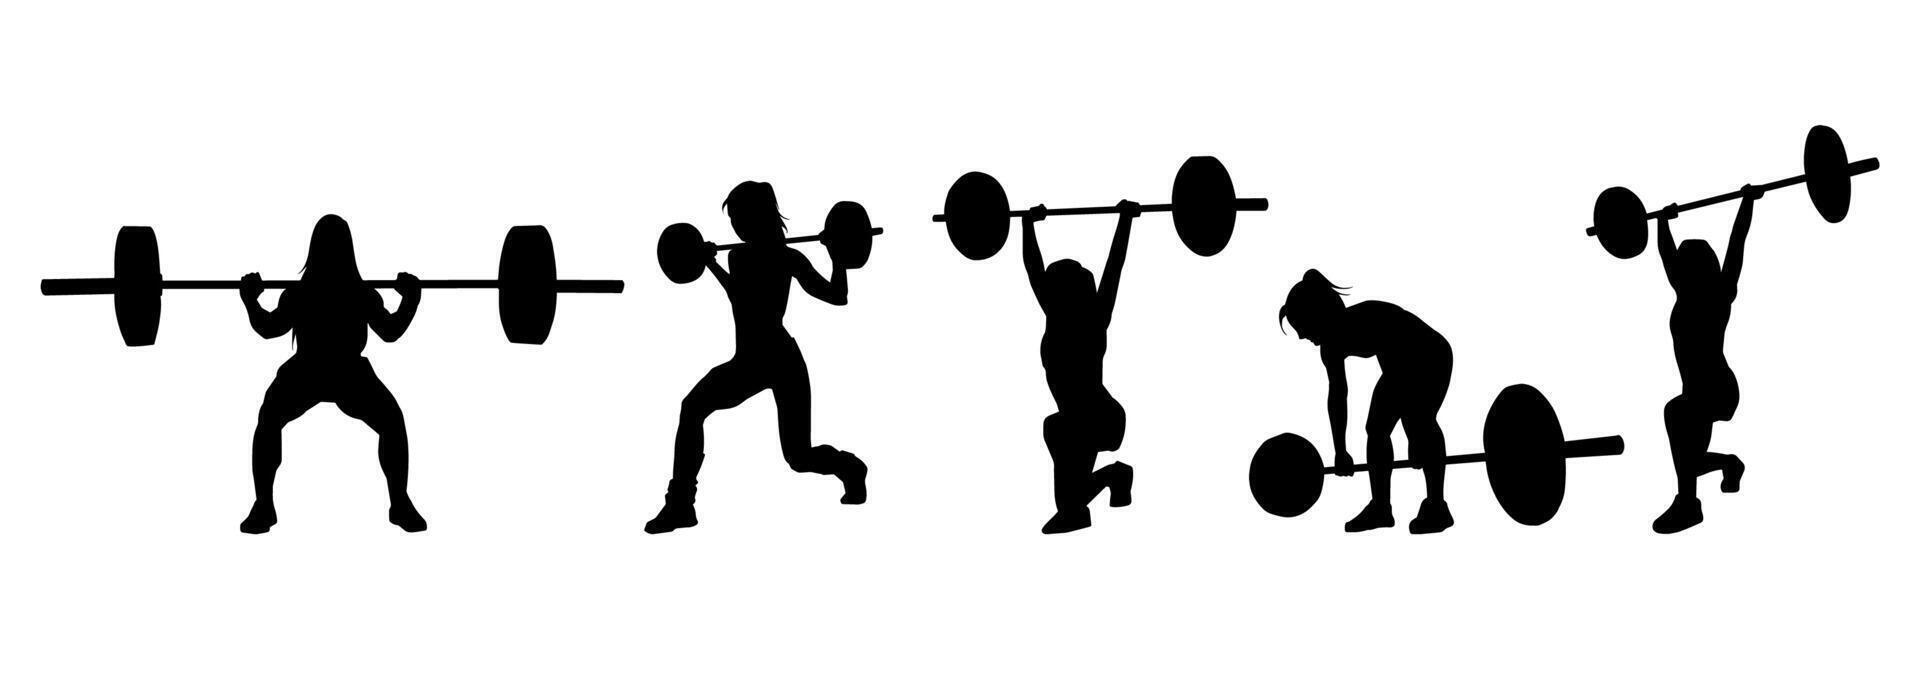 Silhouette collection of weight lifting female athlete in action pose. Silhouette group of women athlete in weight lifting sport. vector